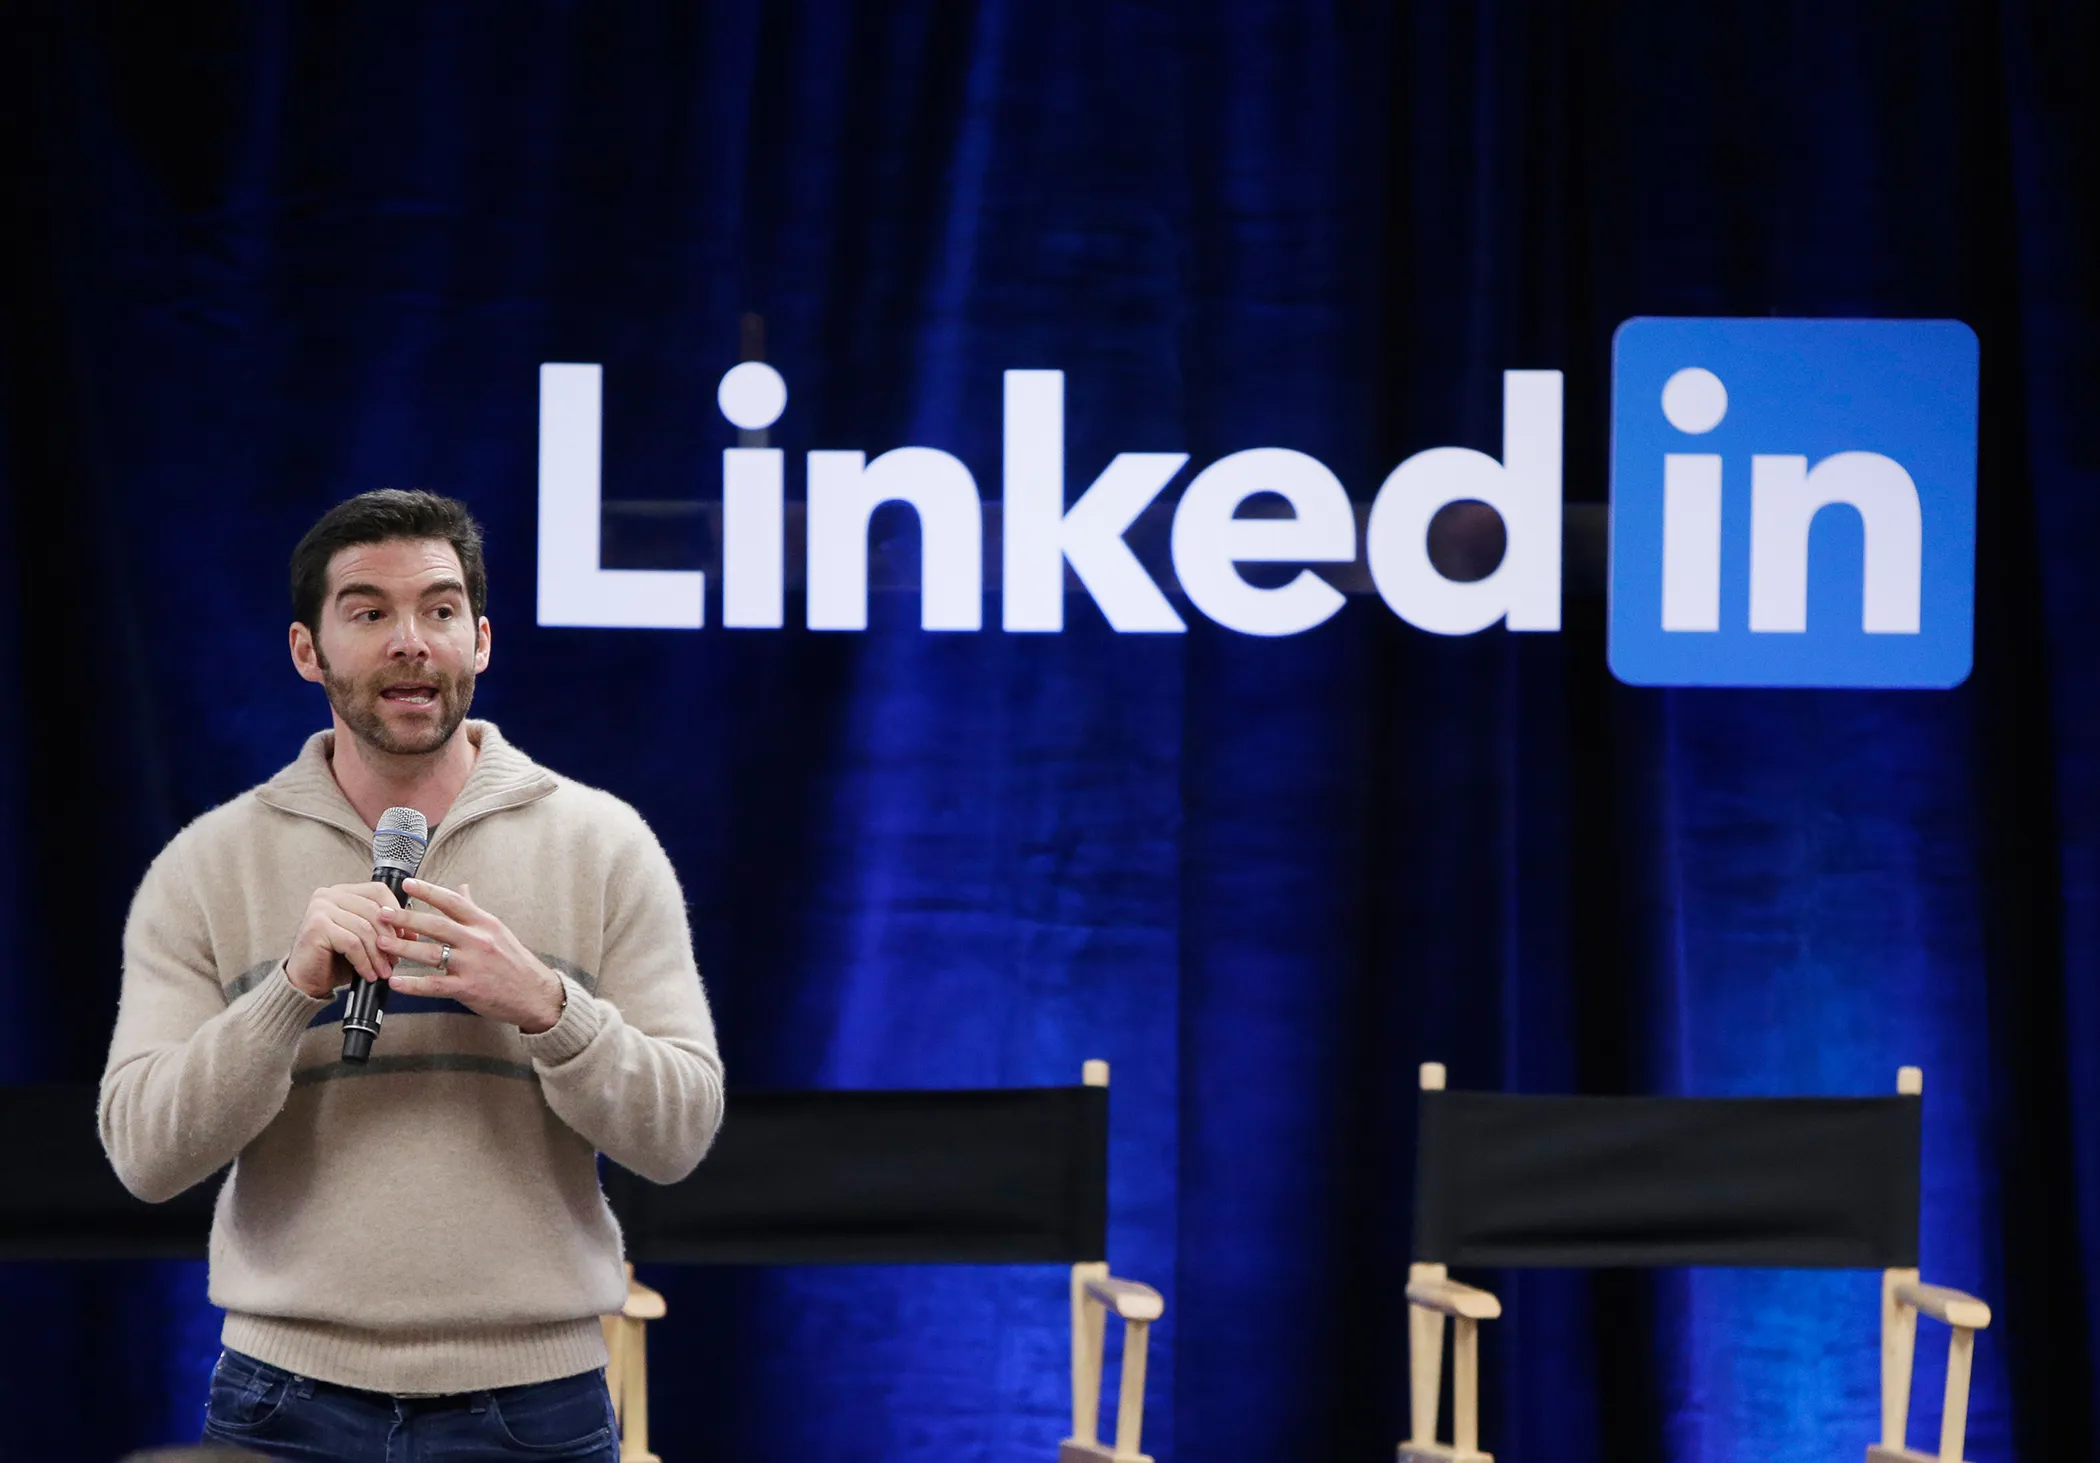 LinkedIn's CEO Is Giving His Entire $14 Million Bonus to His Employees